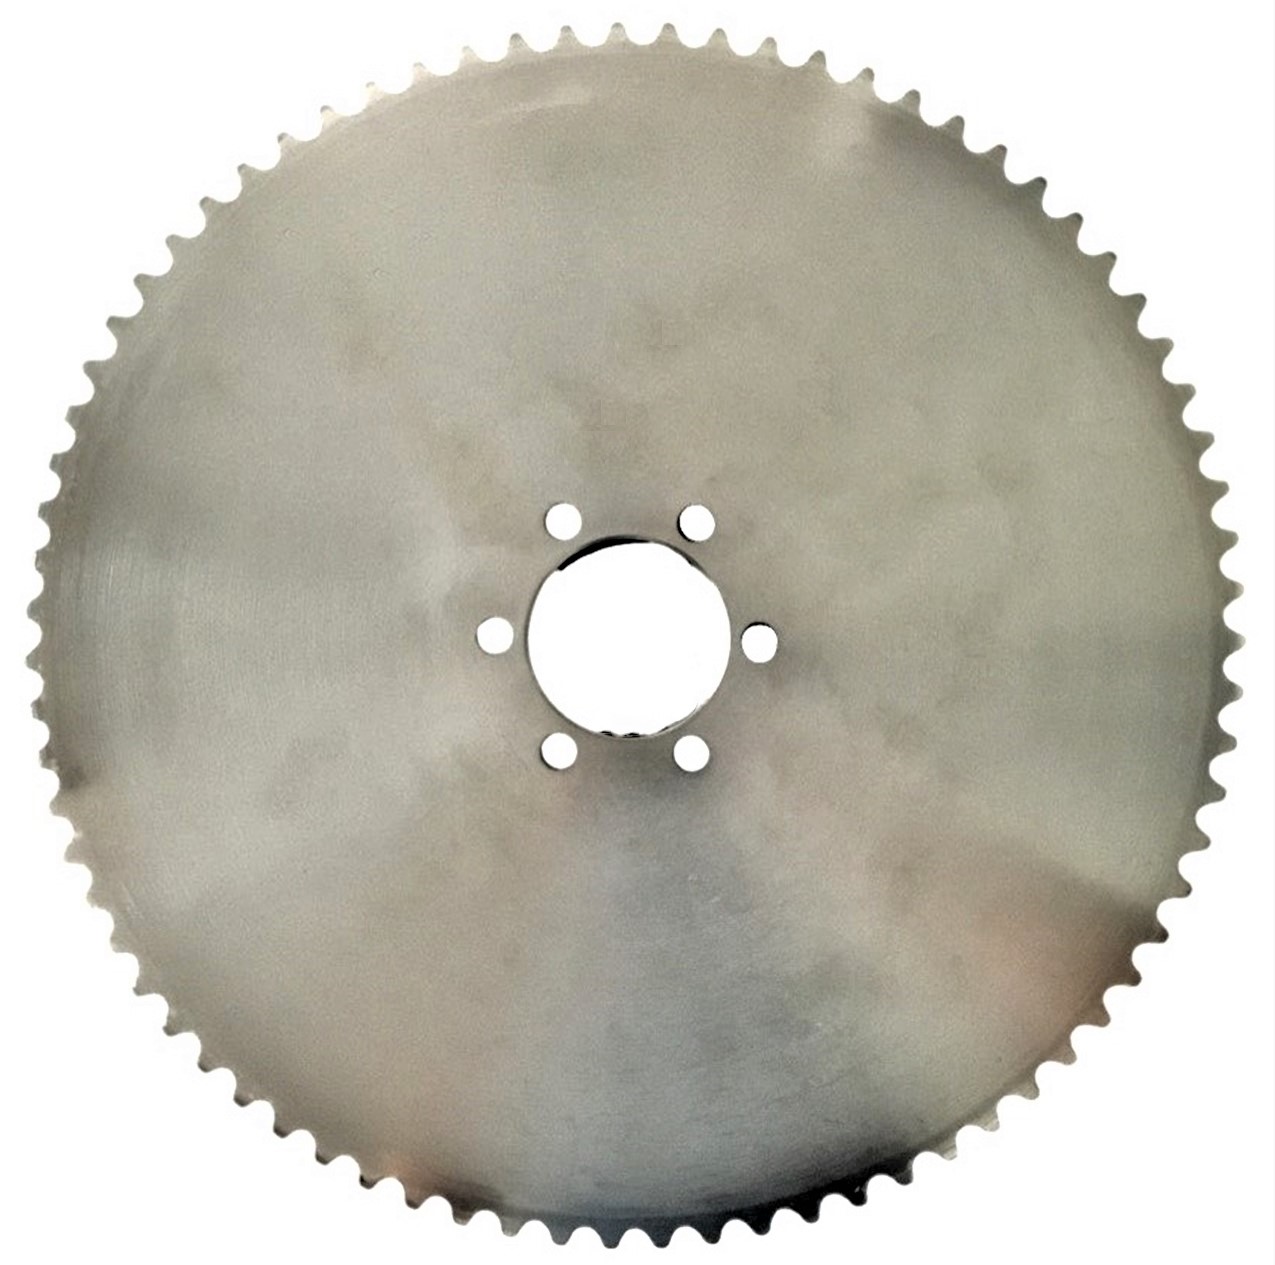 REAR SPROCKET #35 75TH Bolt Pattern=6x50mm (25mm to adjacent hole) Shaft=37mm Fits Coleman CT100, + other small Mini Bikes & GoKarts - Click Image to Close